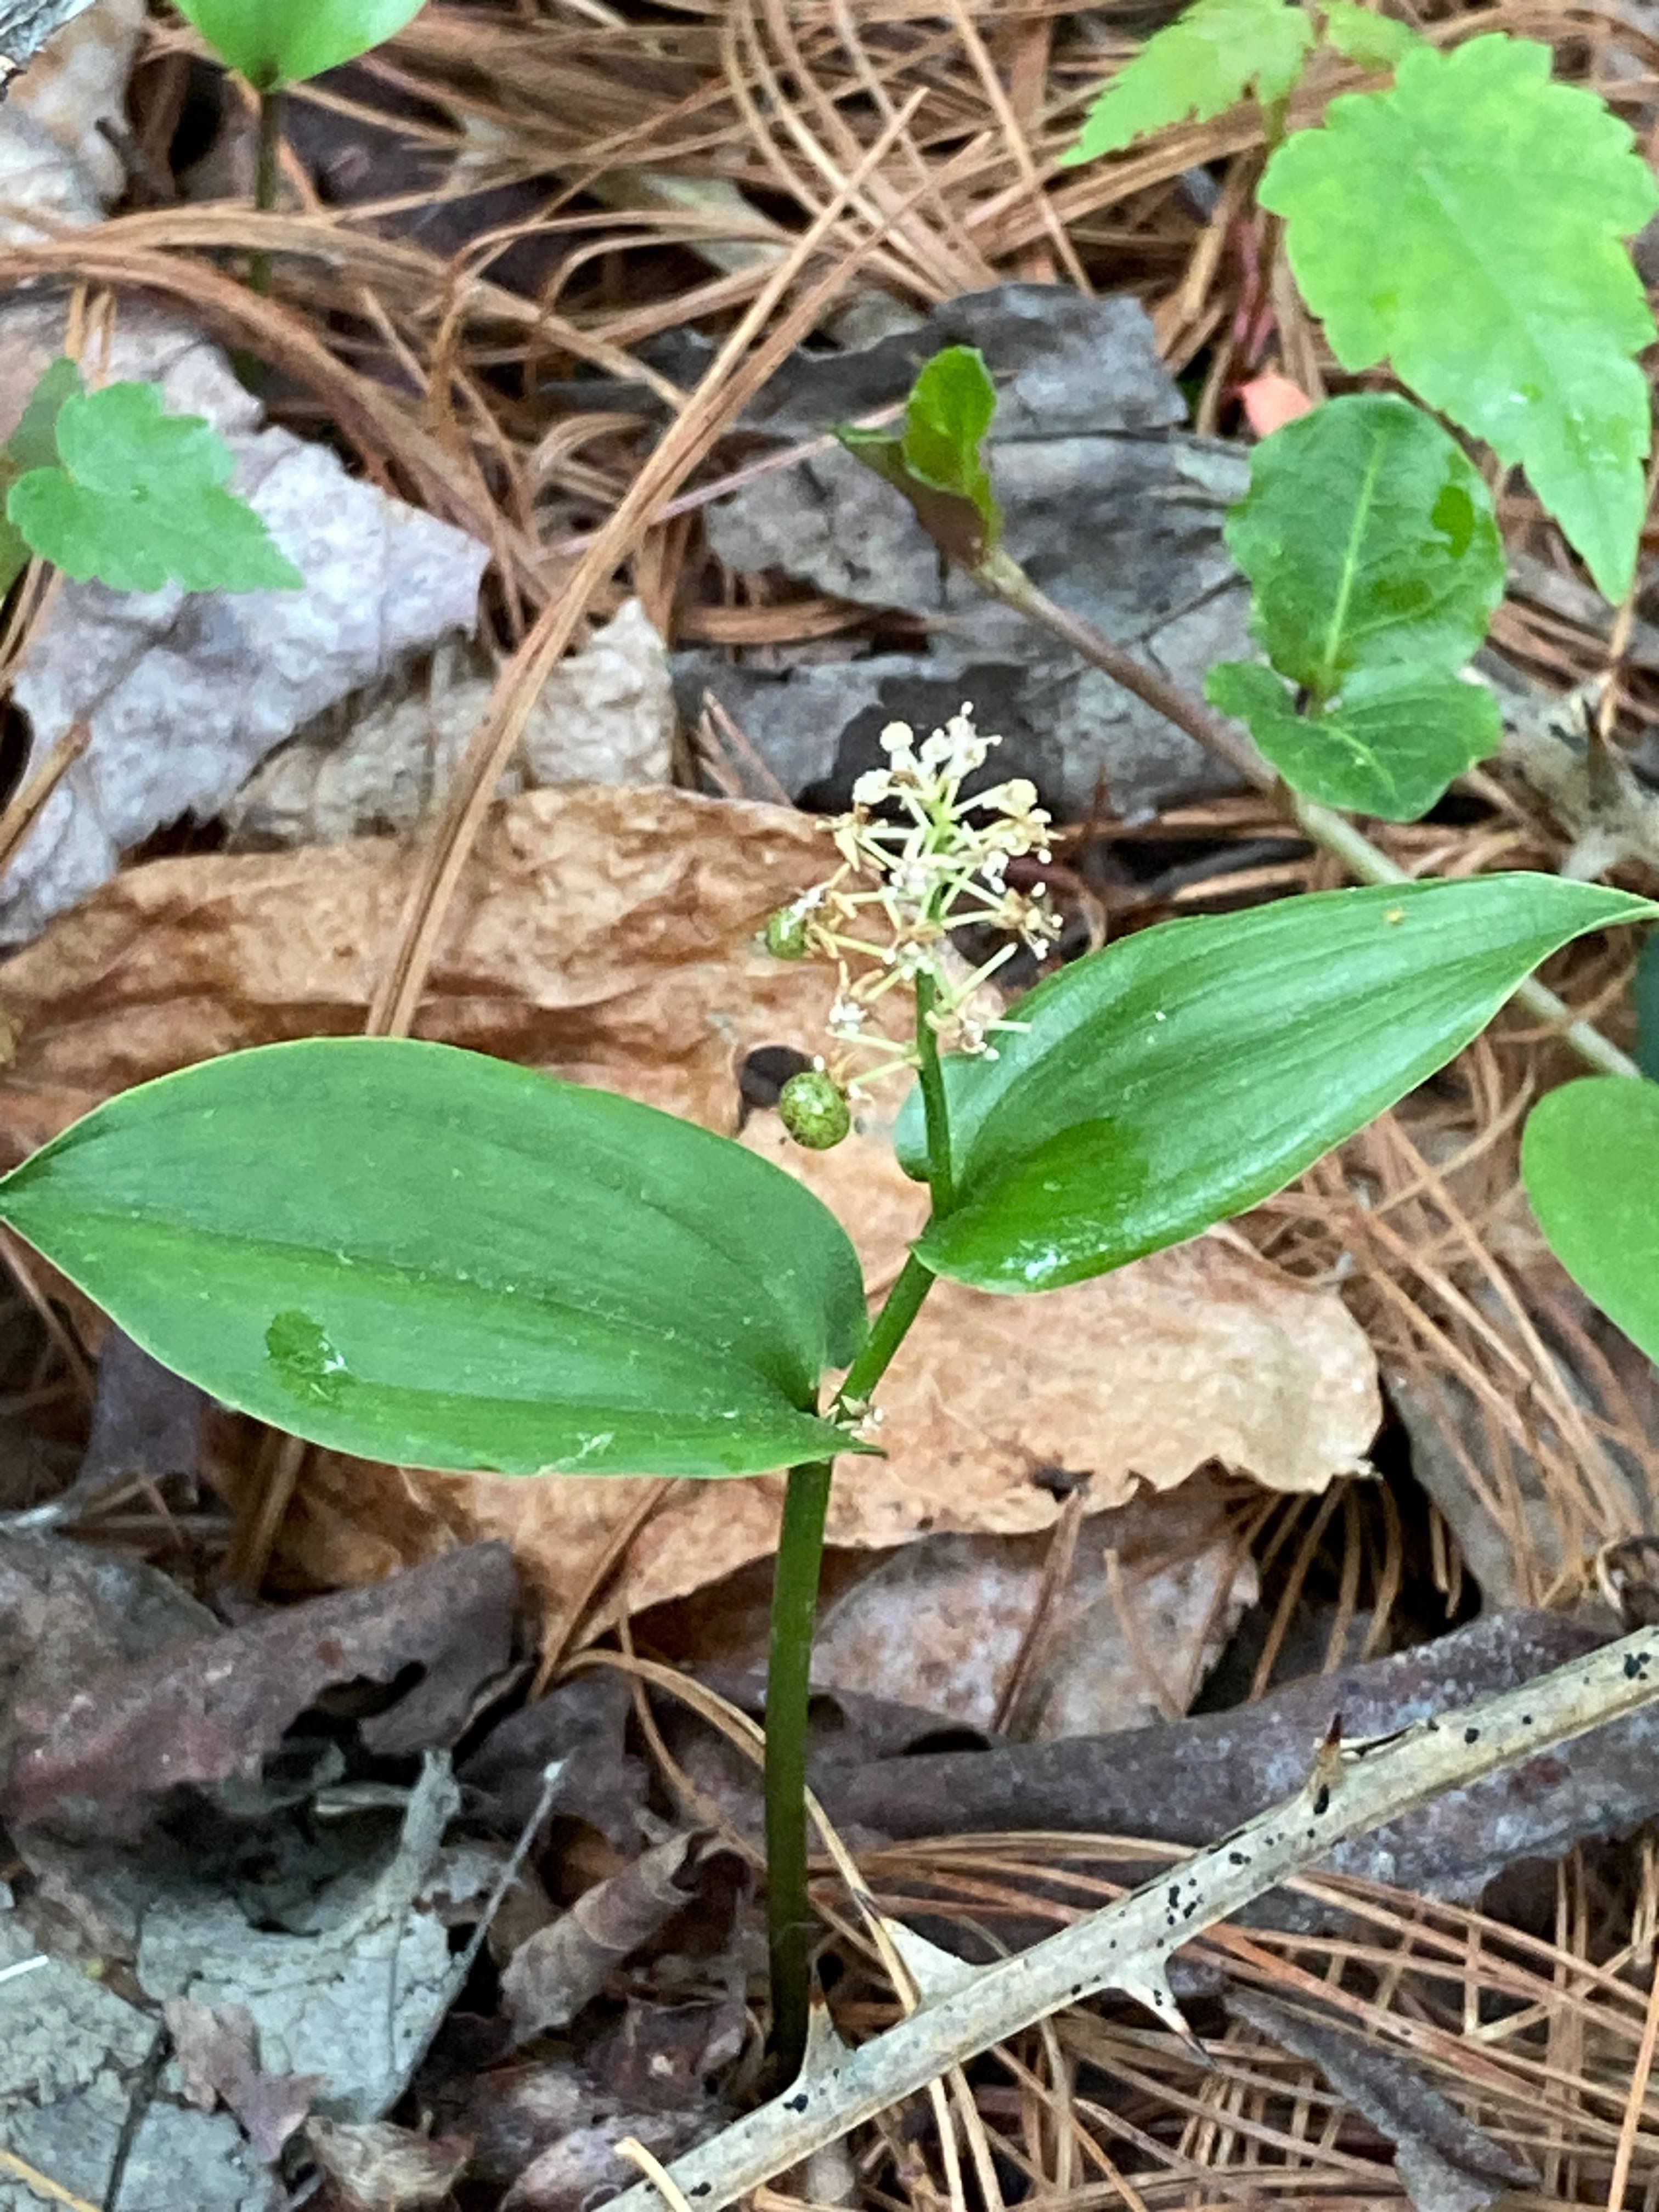 The Scientific Name is Maianthemum canadense [=Unifolium canadense]. You will likely hear them called Canada Mayflower, False Lily-of-the-valley, Canadian Lily-of-the-valley. This picture shows the Senescing flowers with developing fruit. of Maianthemum canadense [=Unifolium canadense]